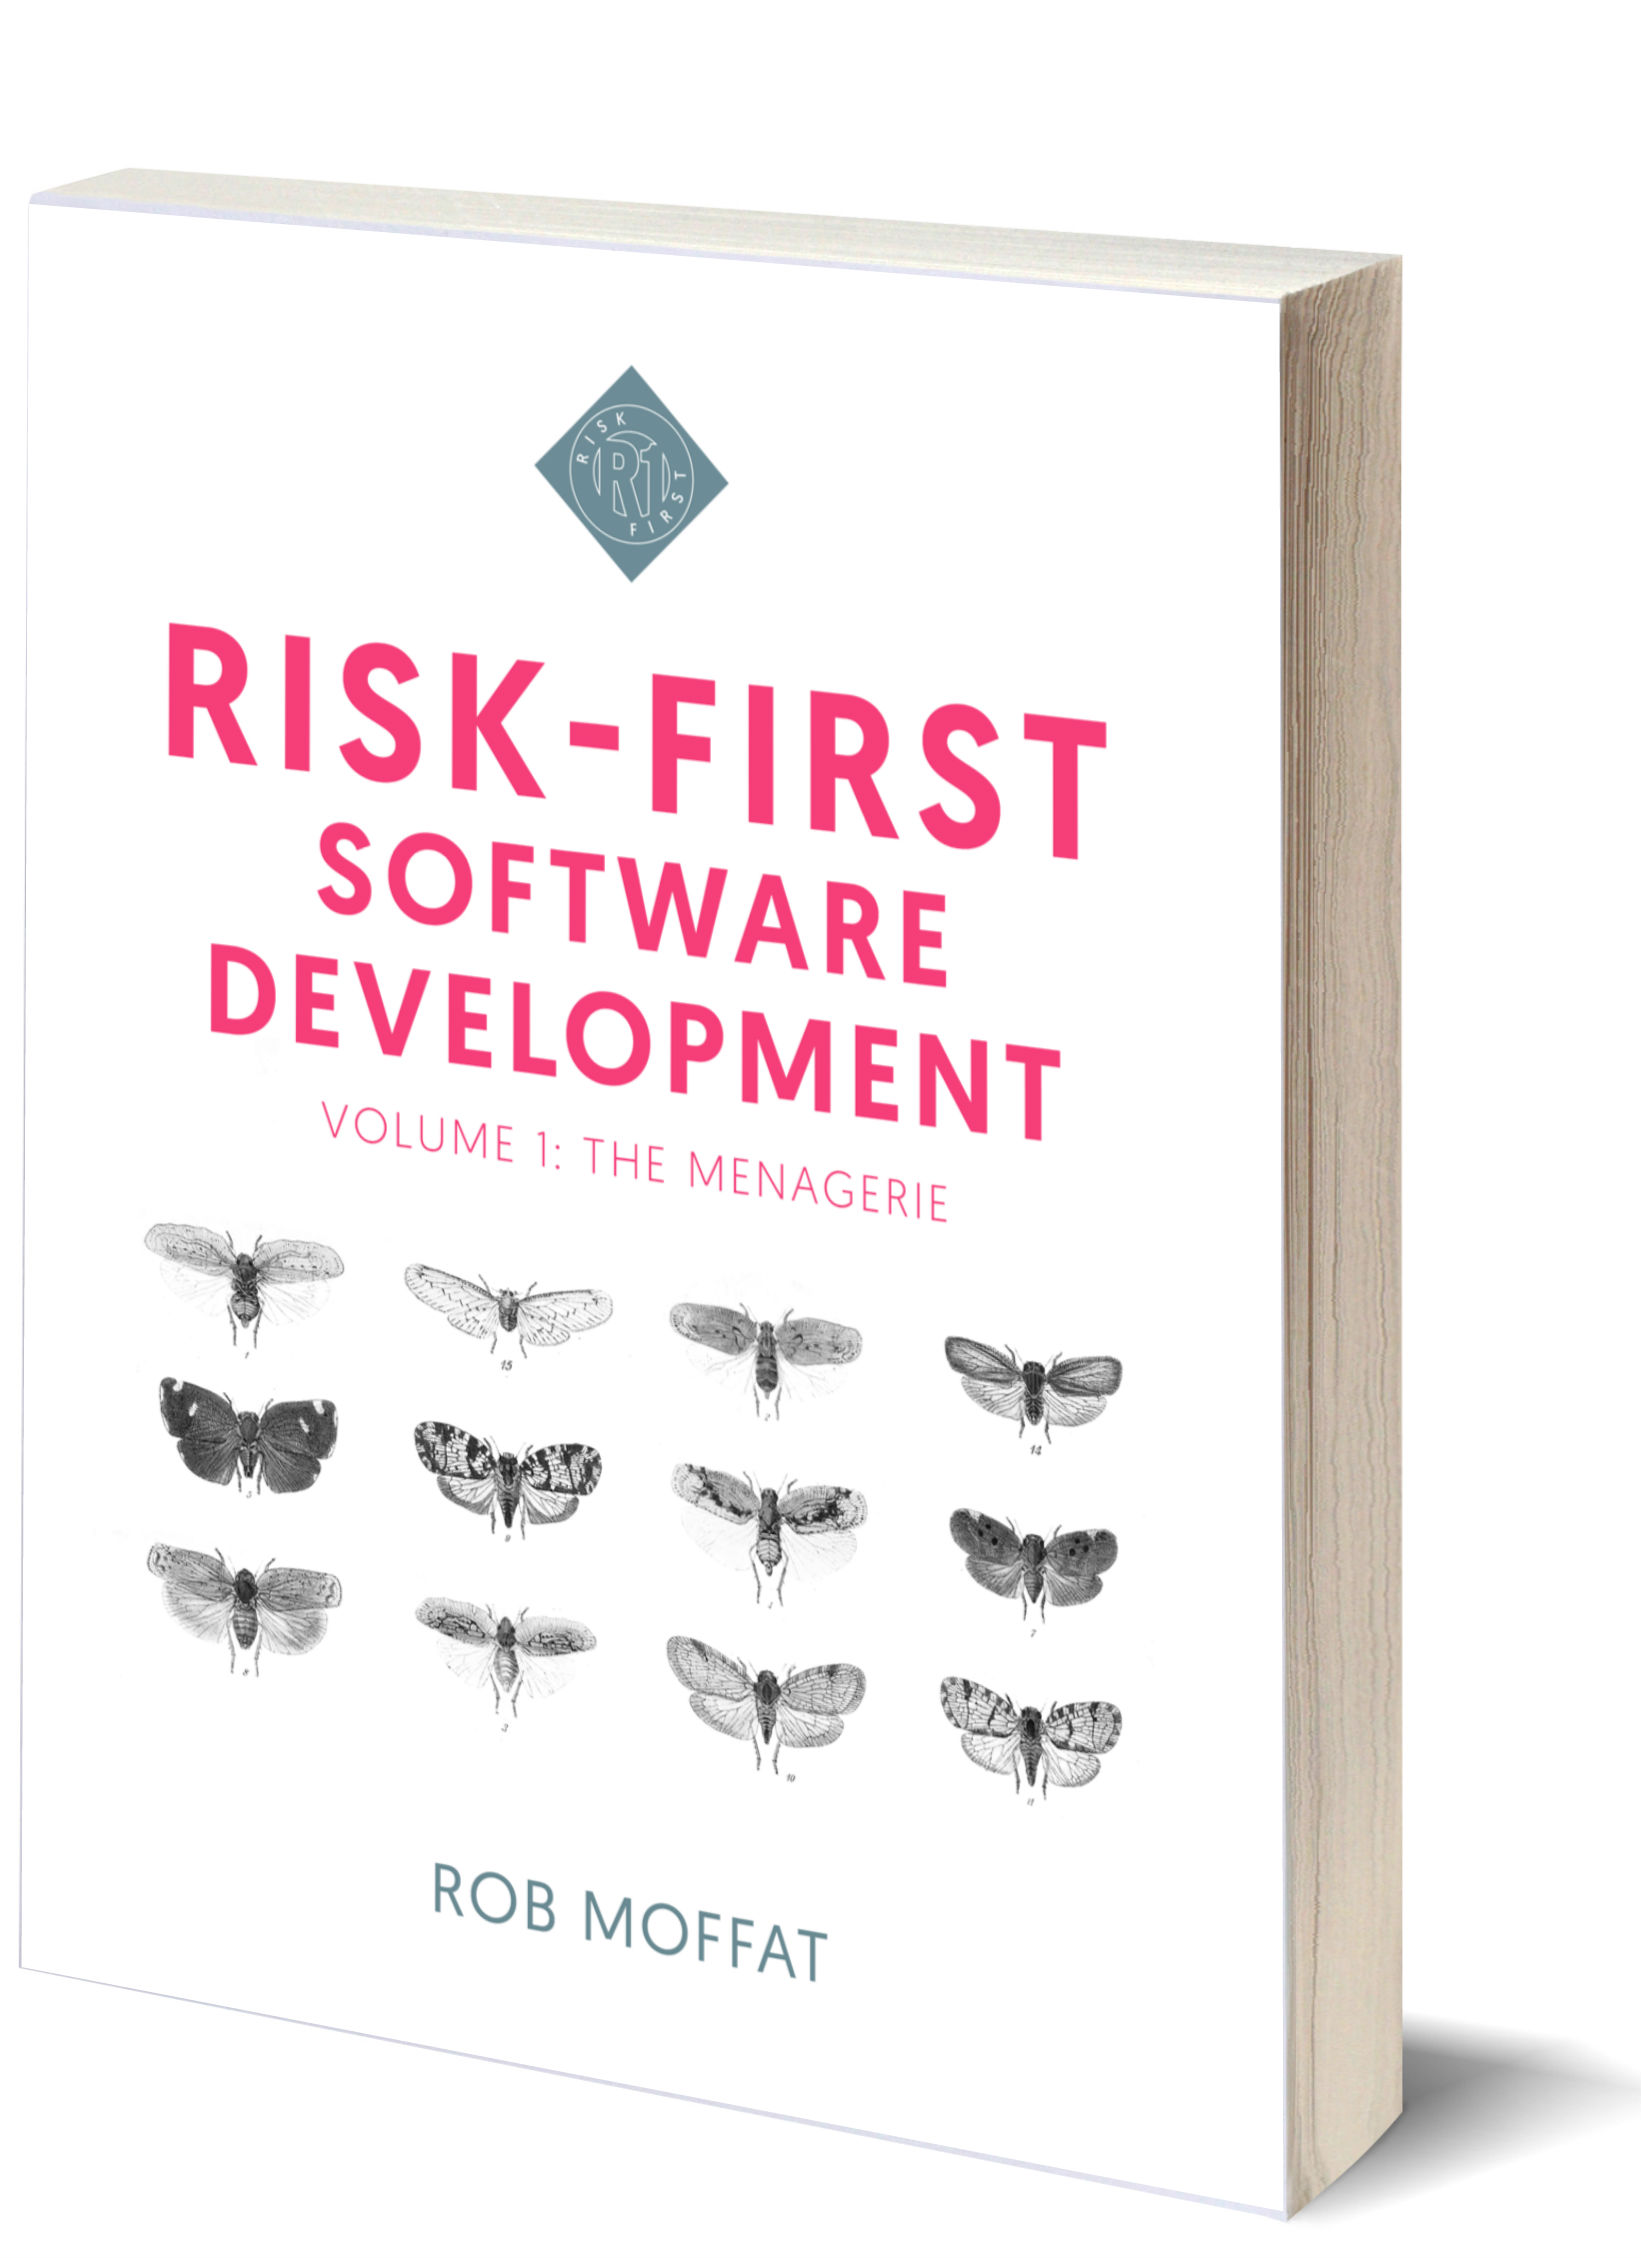 Risk-First Software Development: Volume 1, The Menagerie